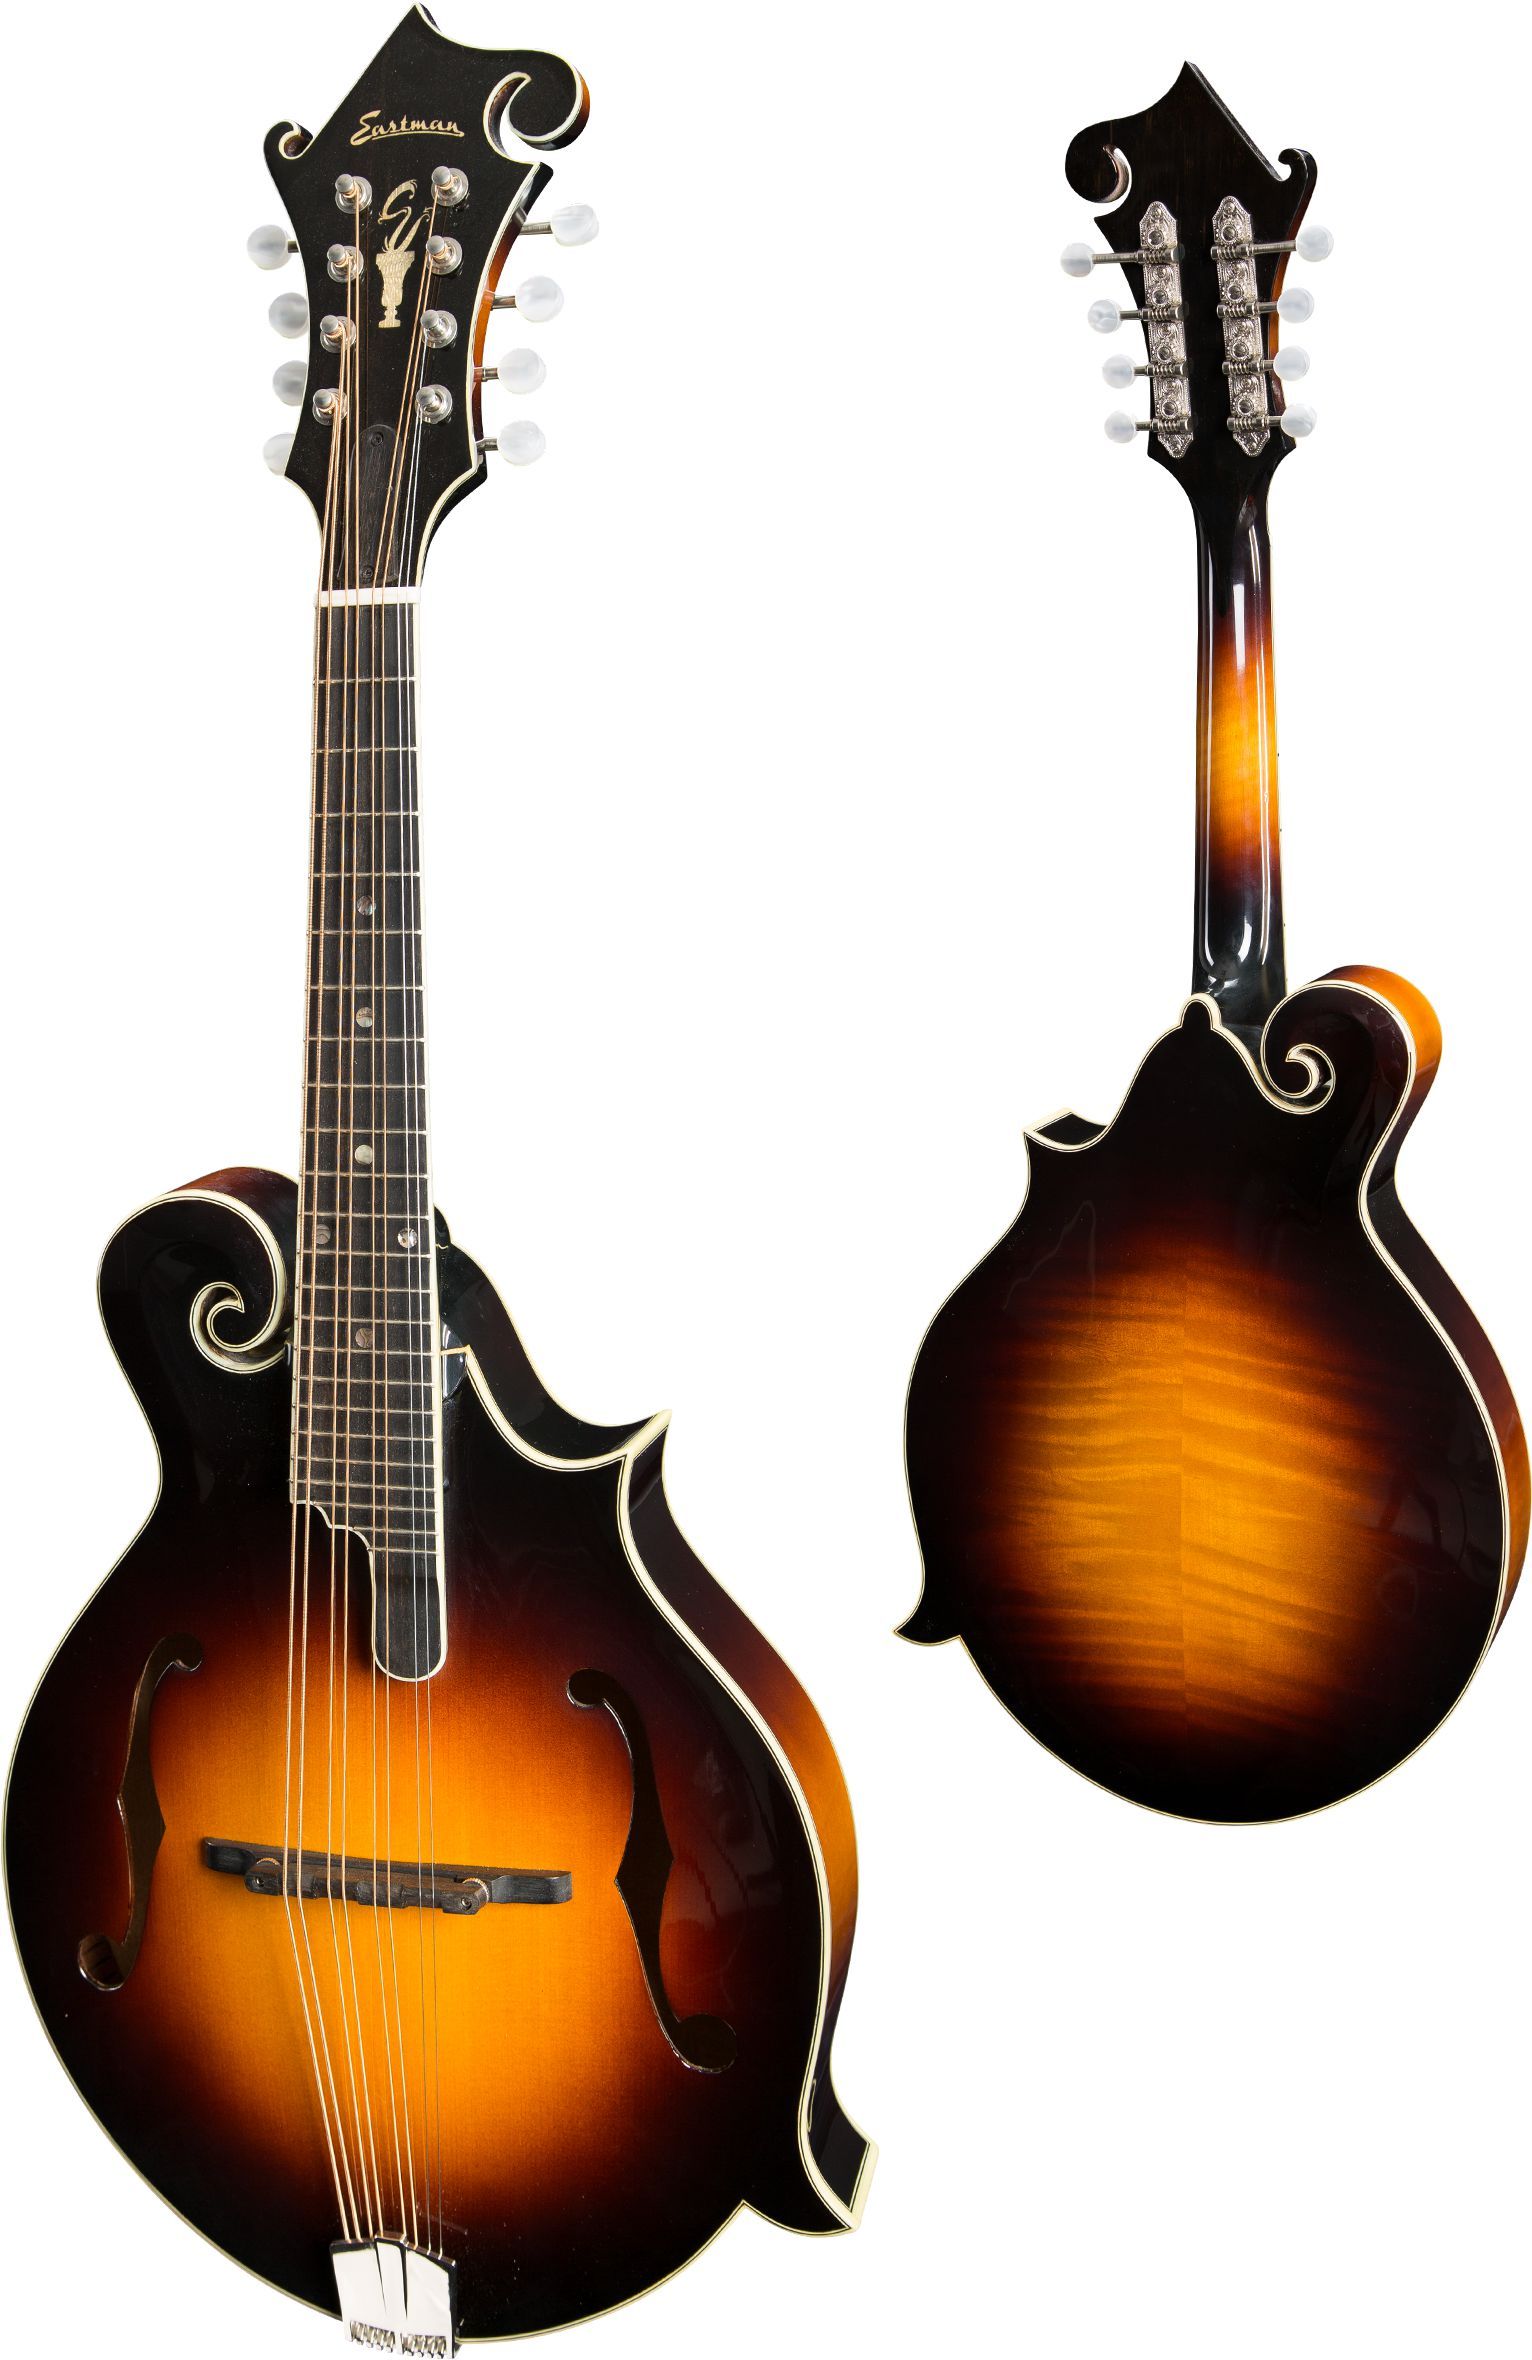 Eastman MDA815 F-style Mandola Mandolin (Solid Spruce top, Solid AAA Maple back & Sides, w/Case), Mandolin for sale at Richards Guitars.